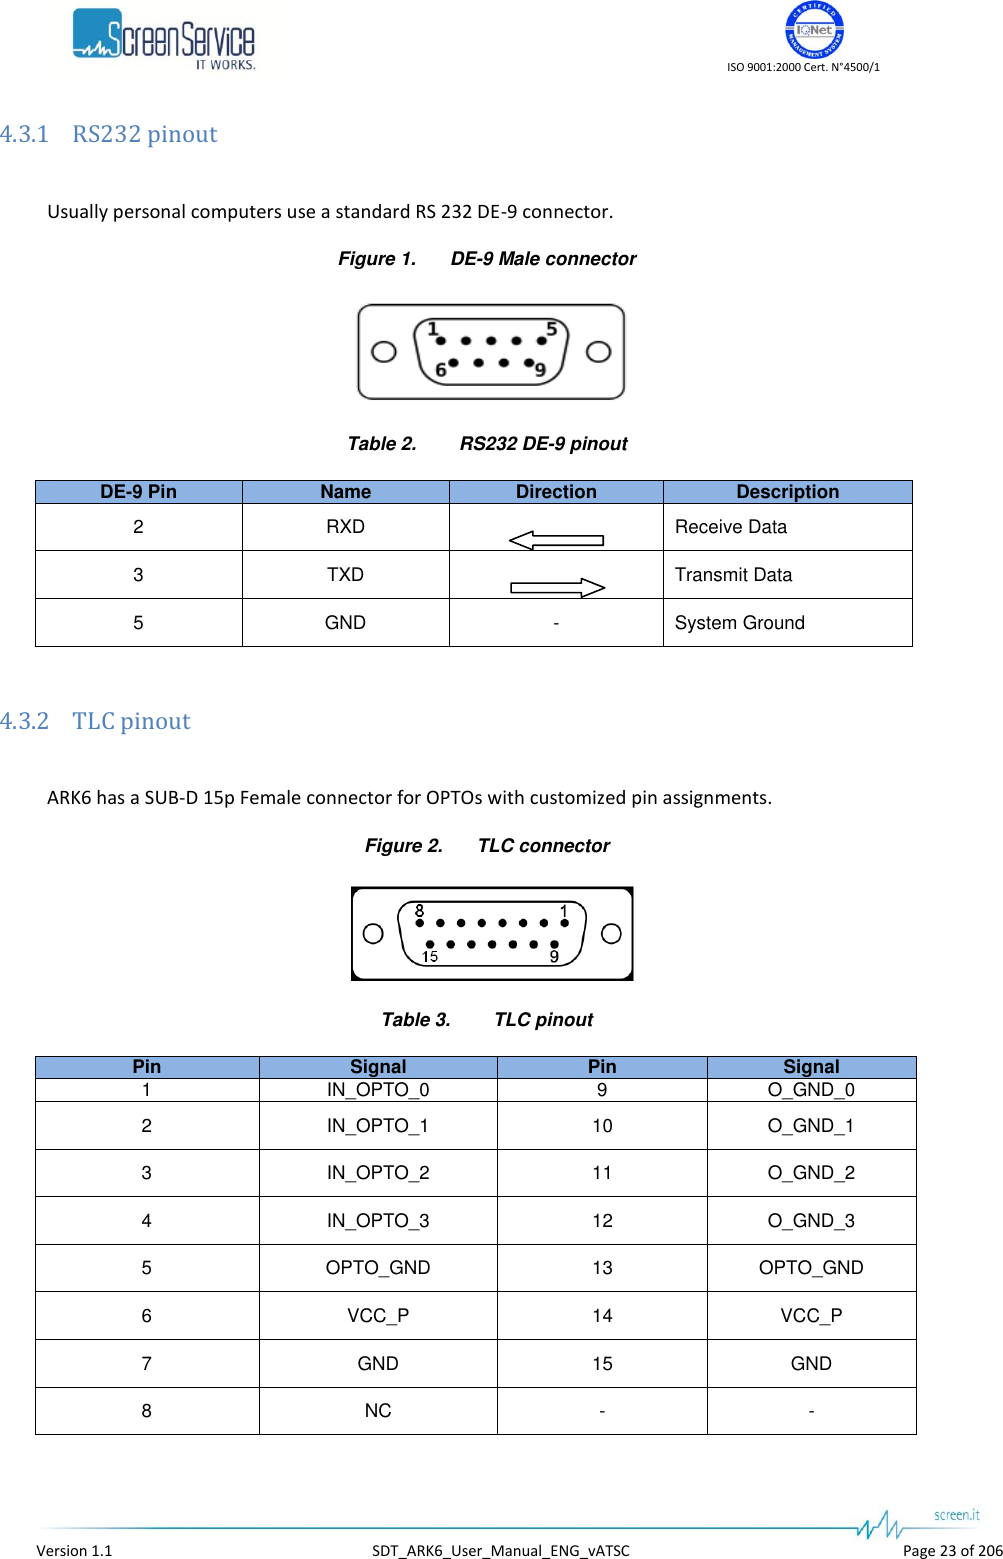    ISO 9001:2000 Cert. N°4500/1   Version 1.1  SDT_ARK6_User_Manual_ENG_vATSC  Page 23 of 206 4.3.1 RS232 pinout  Usually personal computers use a standard RS 232 DE-9 connector. Figure 1. DE-9 Male connector  Table 2.  RS232 DE-9 pinout DE-9 Pin Name Direction Description 2 RXD  Receive Data 3 TXD  Transmit Data 5 GND - System Ground  4.3.2 TLC pinout  ARK6 has a SUB-D 15p Female connector for OPTOs with customized pin assignments. Figure 2. TLC connector  Table 3.  TLC pinout Pin Signal Pin Signal 1 IN_OPTO_0 9 O_GND_0 2 IN_OPTO_1 10 O_GND_1 3 IN_OPTO_2 11 O_GND_2 4 IN_OPTO_3 12 O_GND_3 5 OPTO_GND 13 OPTO_GND 6 VCC_P 14 VCC_P 7 GND 15 GND 8 NC - -  